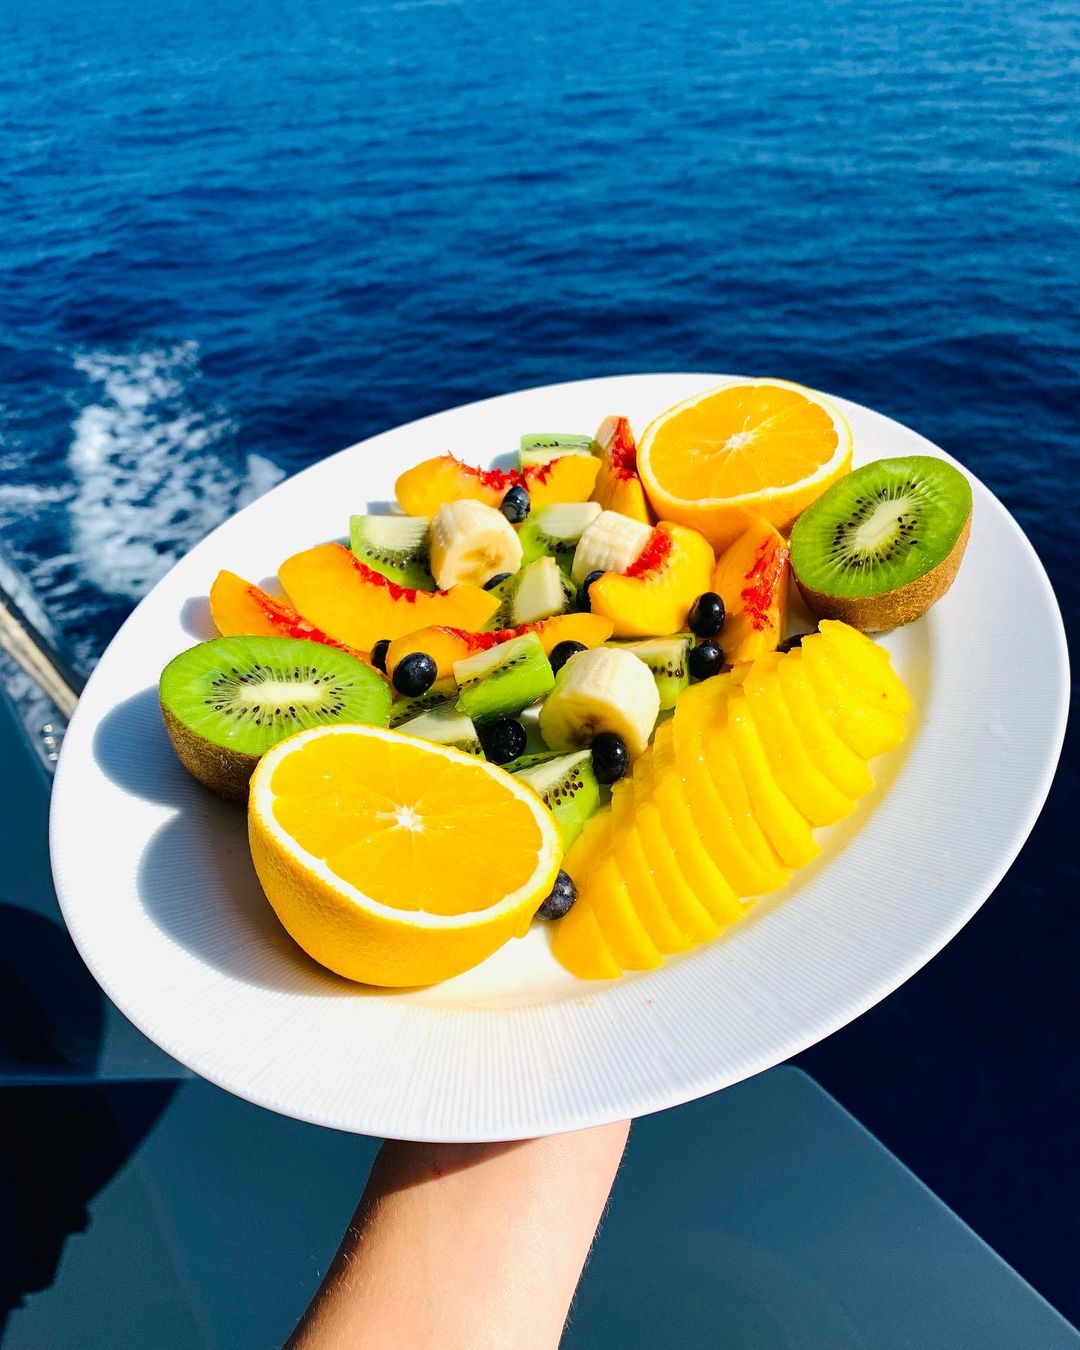 fruits served on a plate